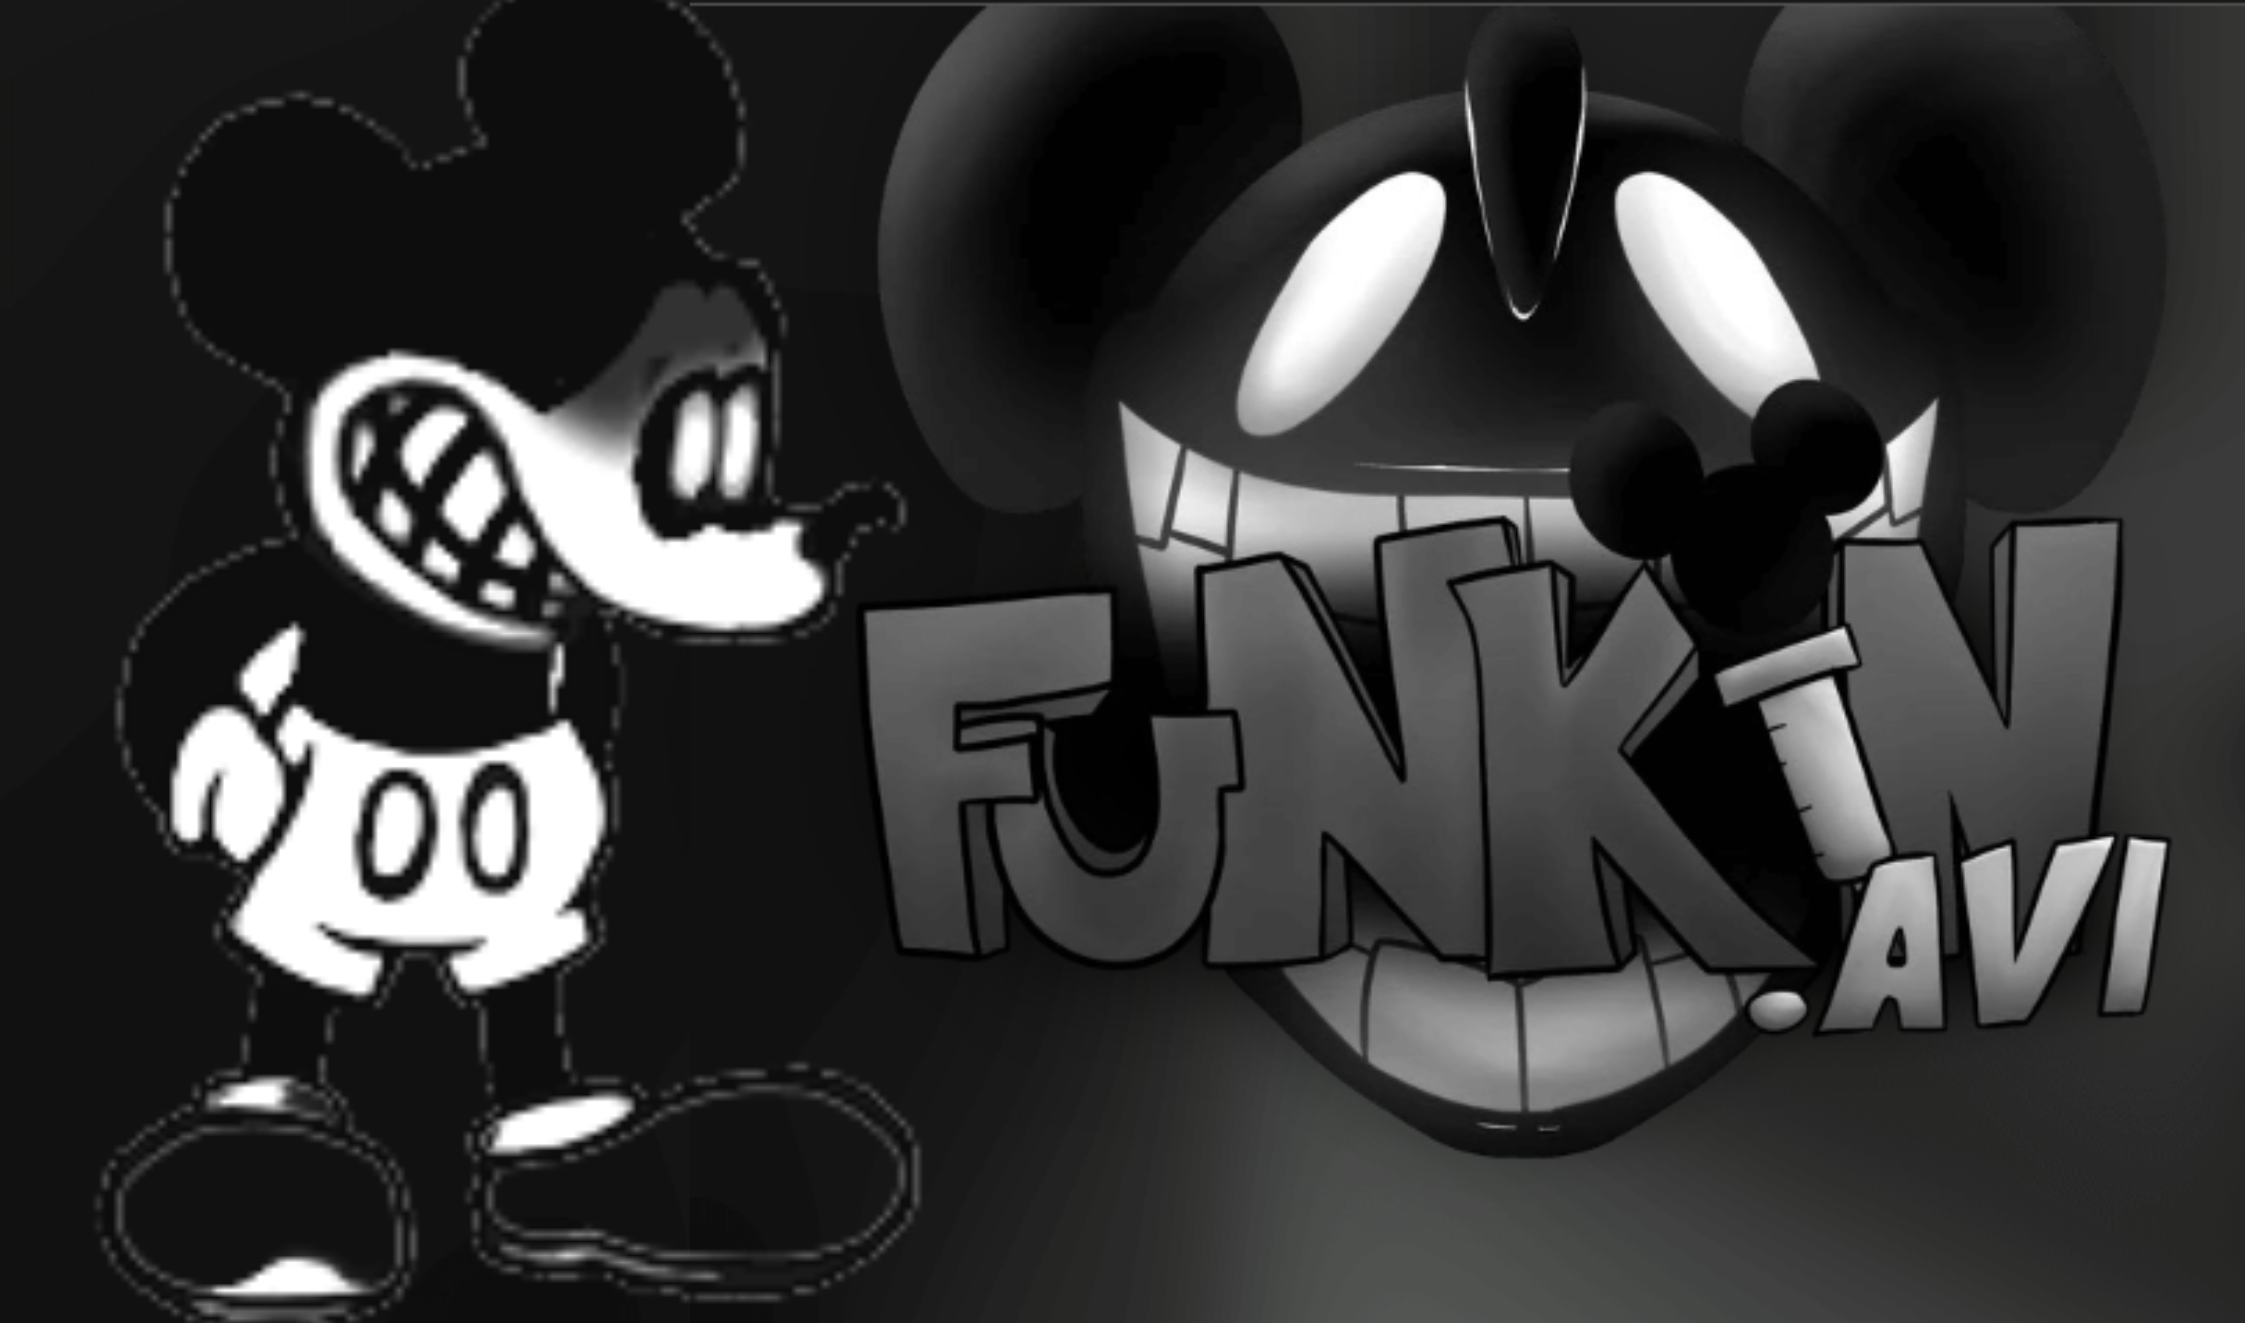 FRIDAY NIGHT FUNKIN' VS SUICIDE MOUSE free online game on